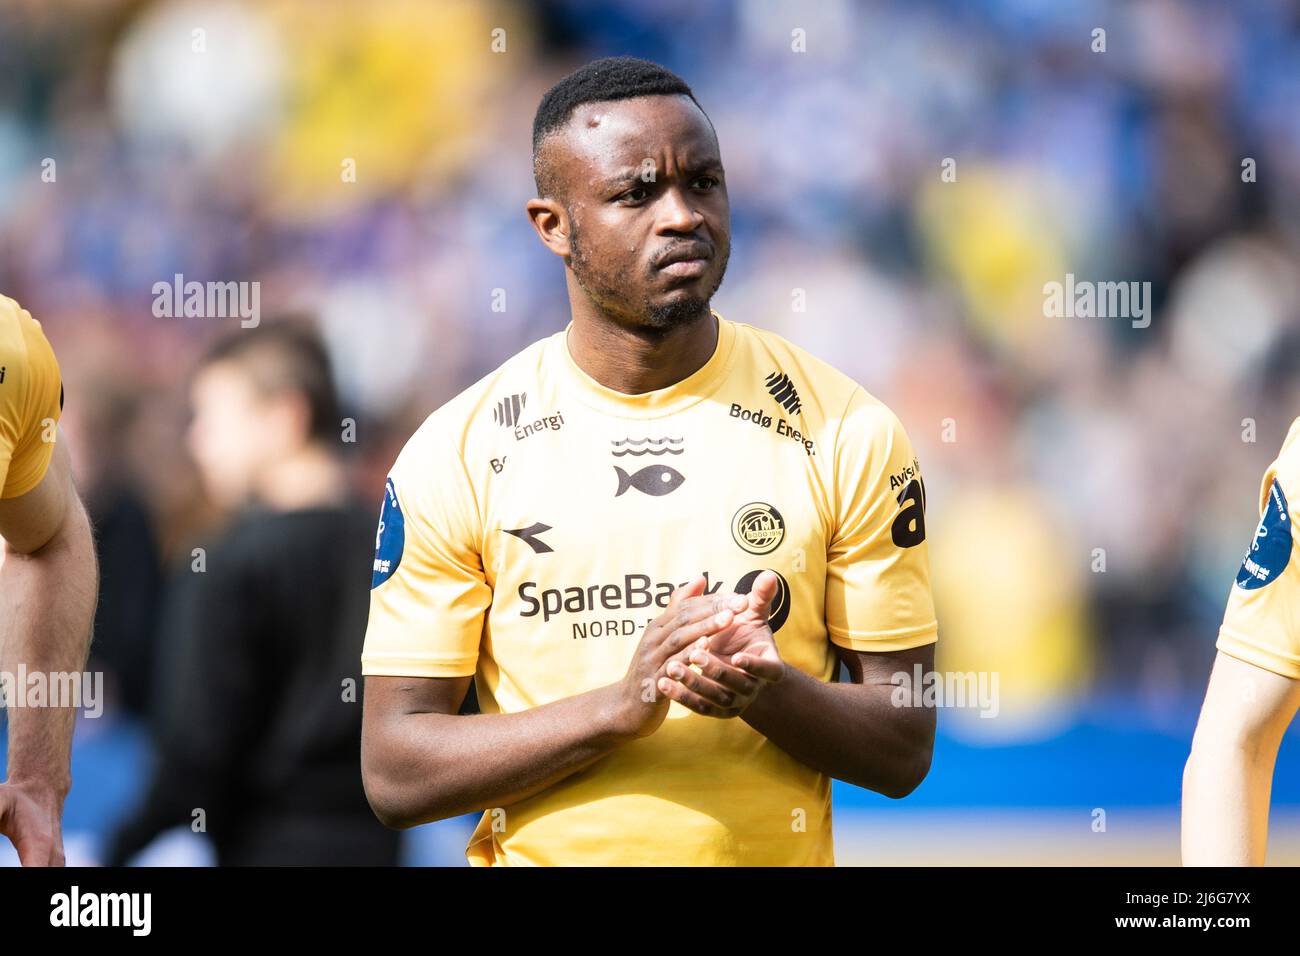 Oslo, Norway. 01st, May 2022. Brice Wembangomo (5) of Bodoe/Glimt during the Norwegian Cup final, the NM Menn final, between Bodoe/Glimt and Molde at Ullevaal Stadion in Oslo. (Photo credit: Gonzales Photo - Jan-Erik Eriksen). Credit: Gonzales Photo/Alamy Live News Stock Photo